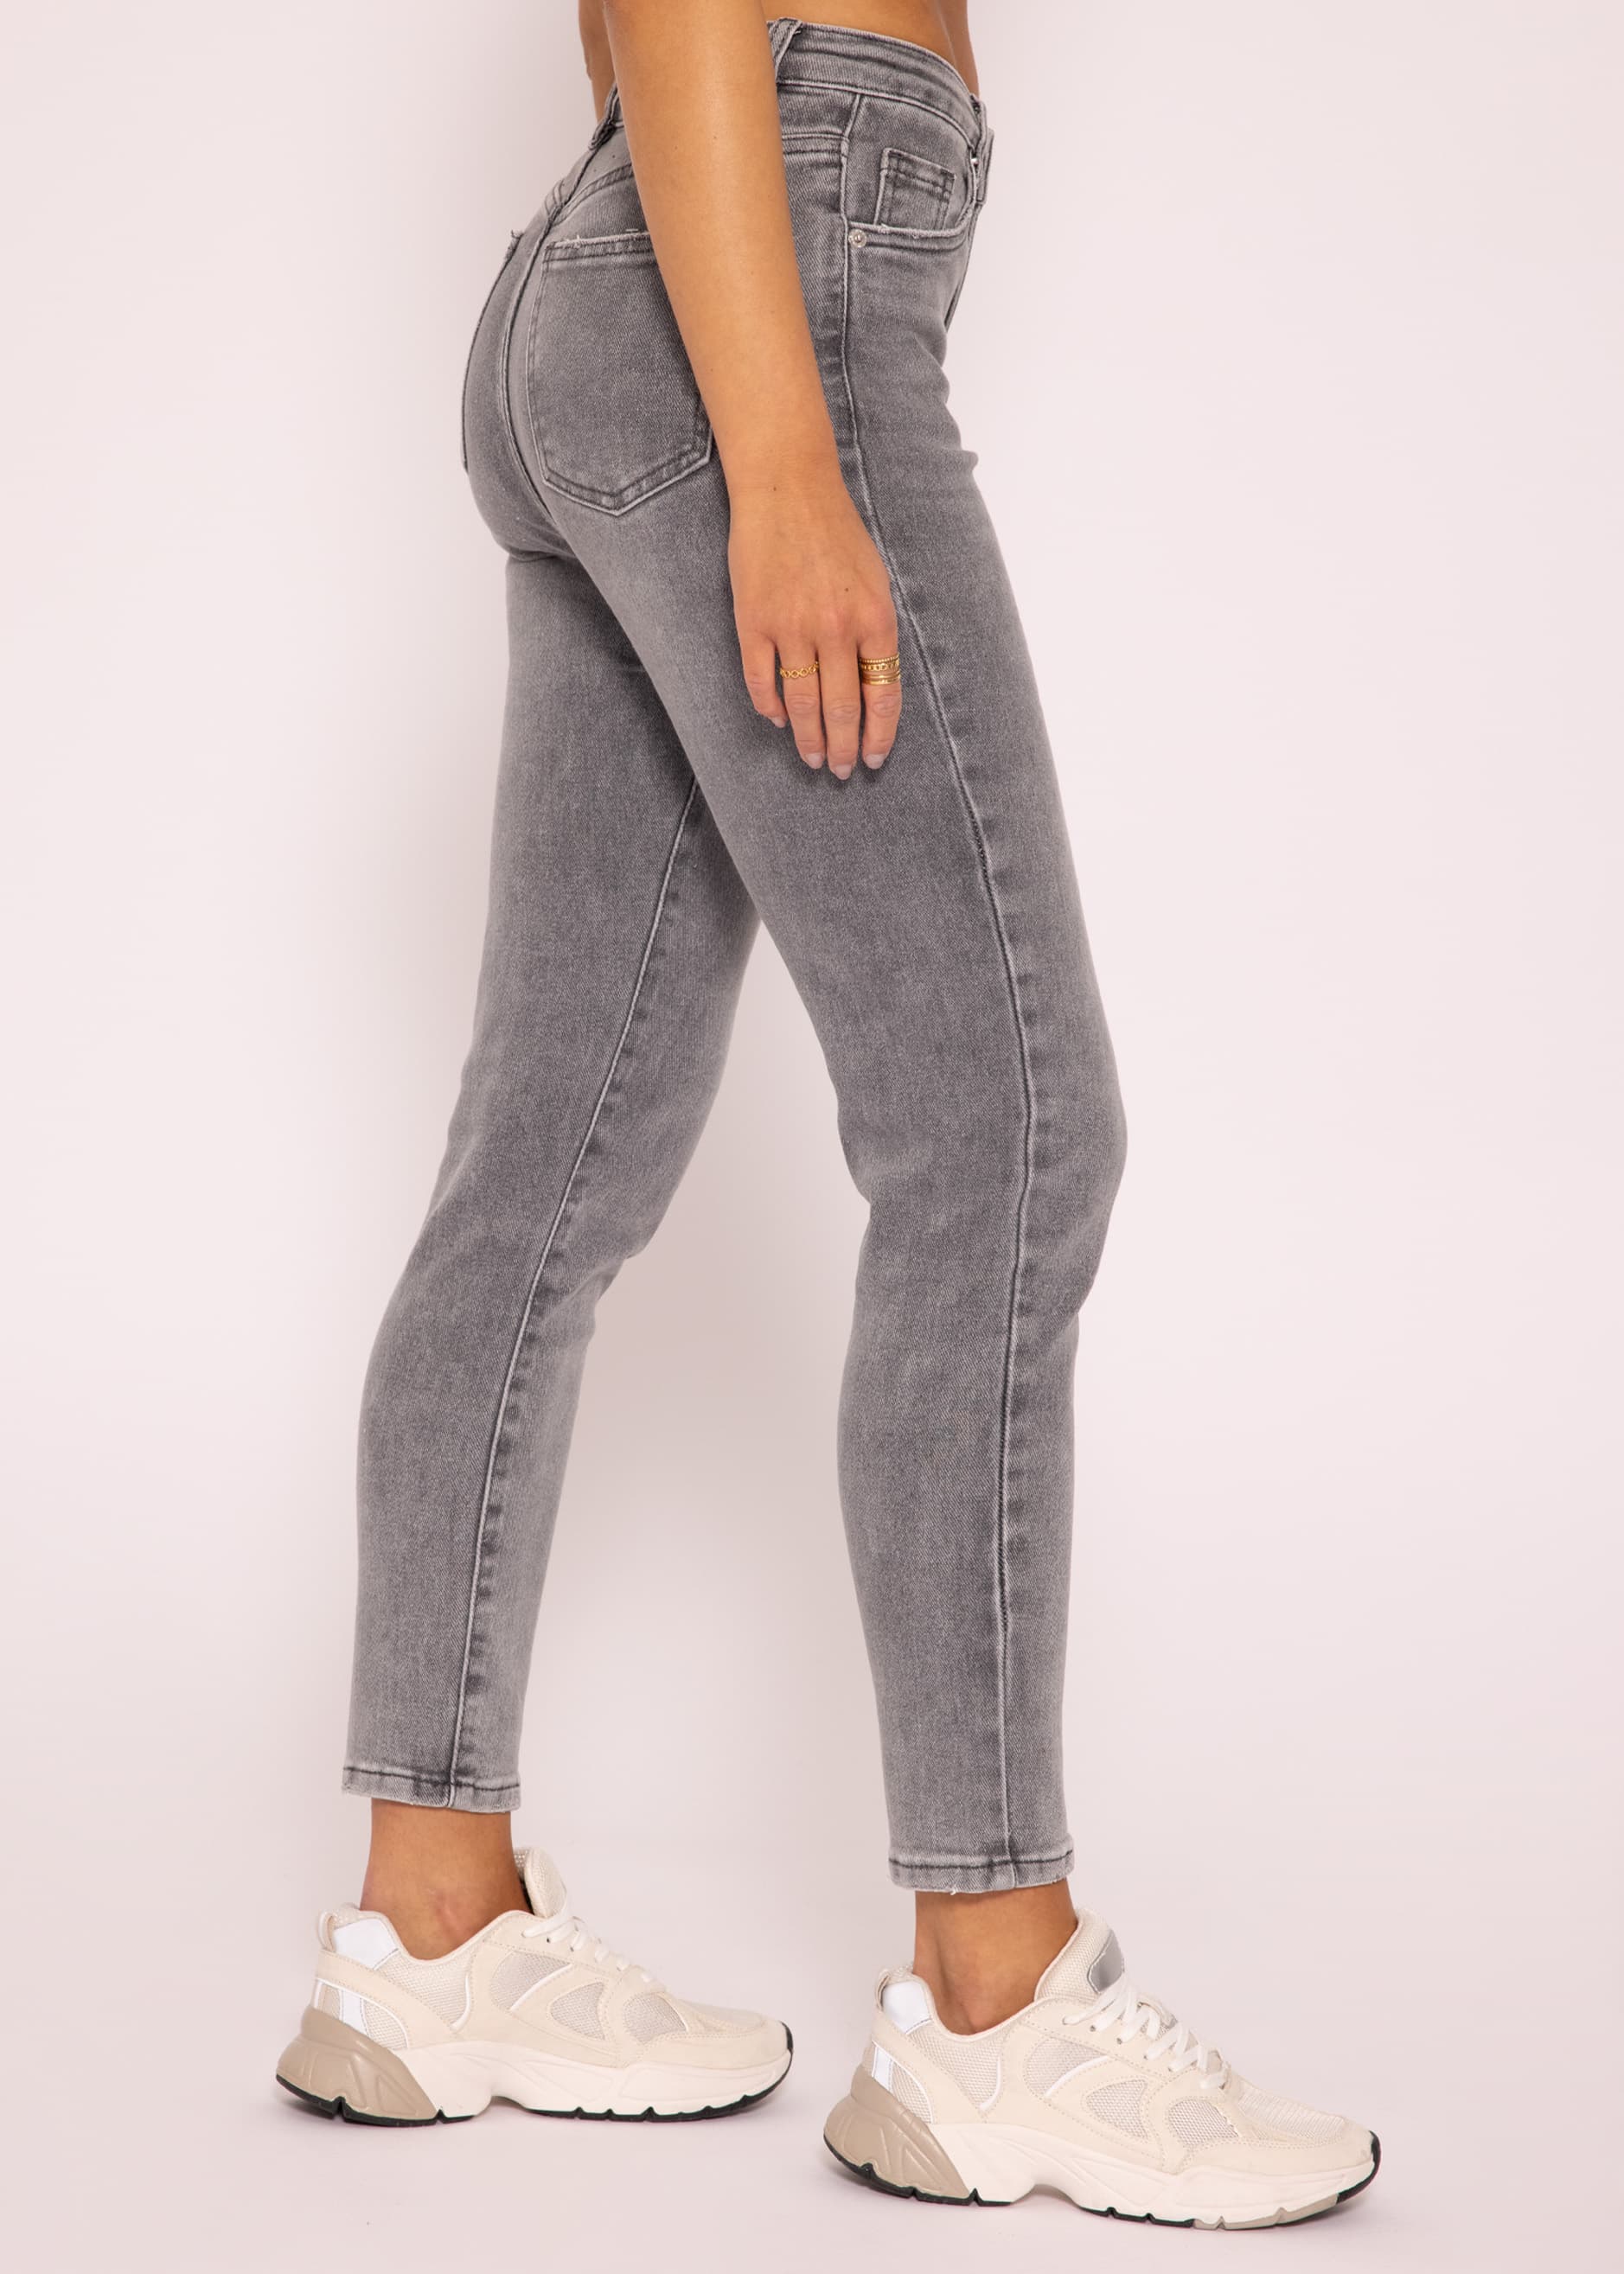 Relax Fit Highwaist Jeans, gray, Jeans, Clothing